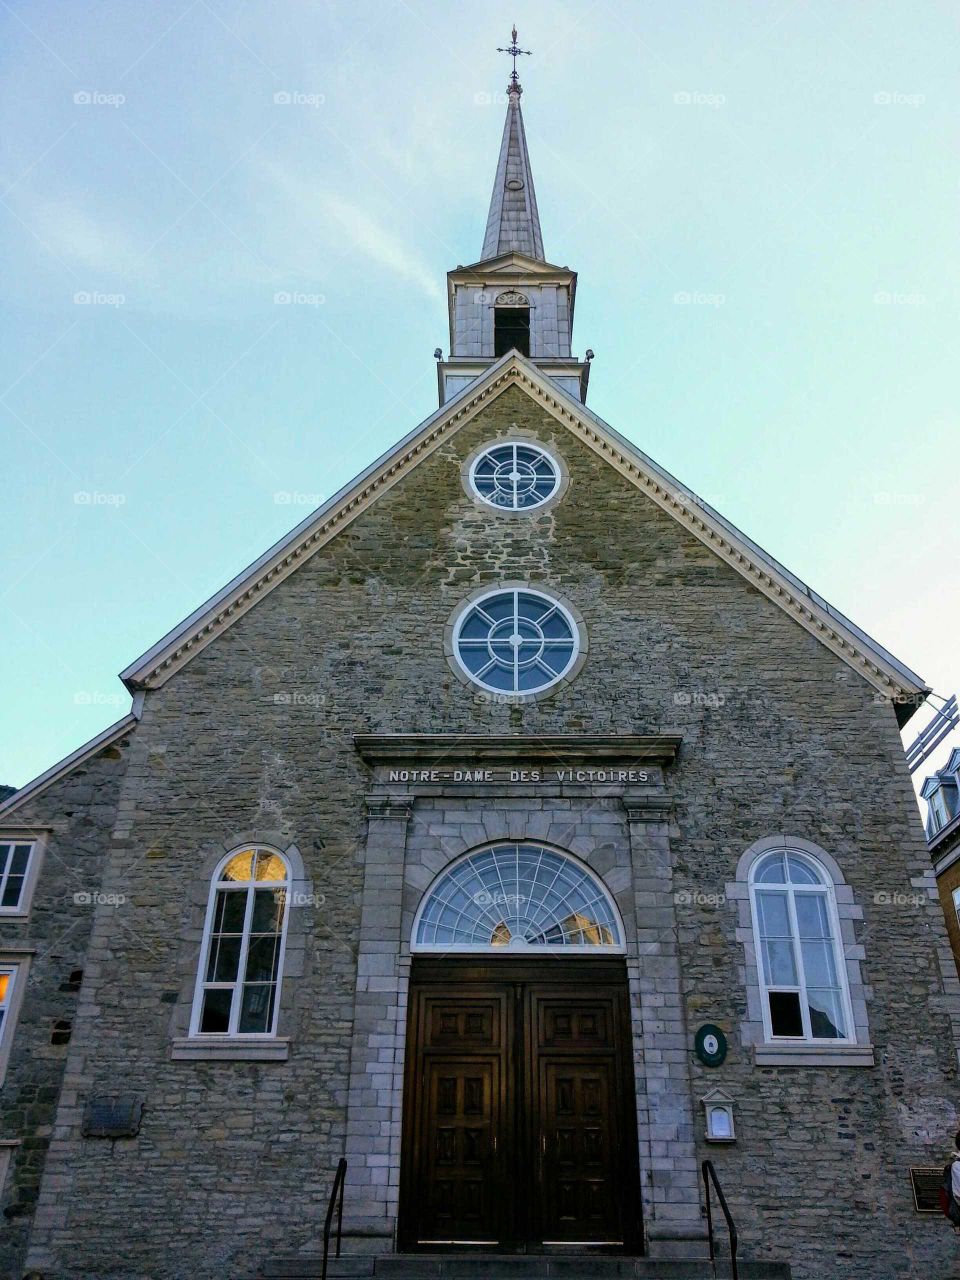 An old stone church in Old Quebec